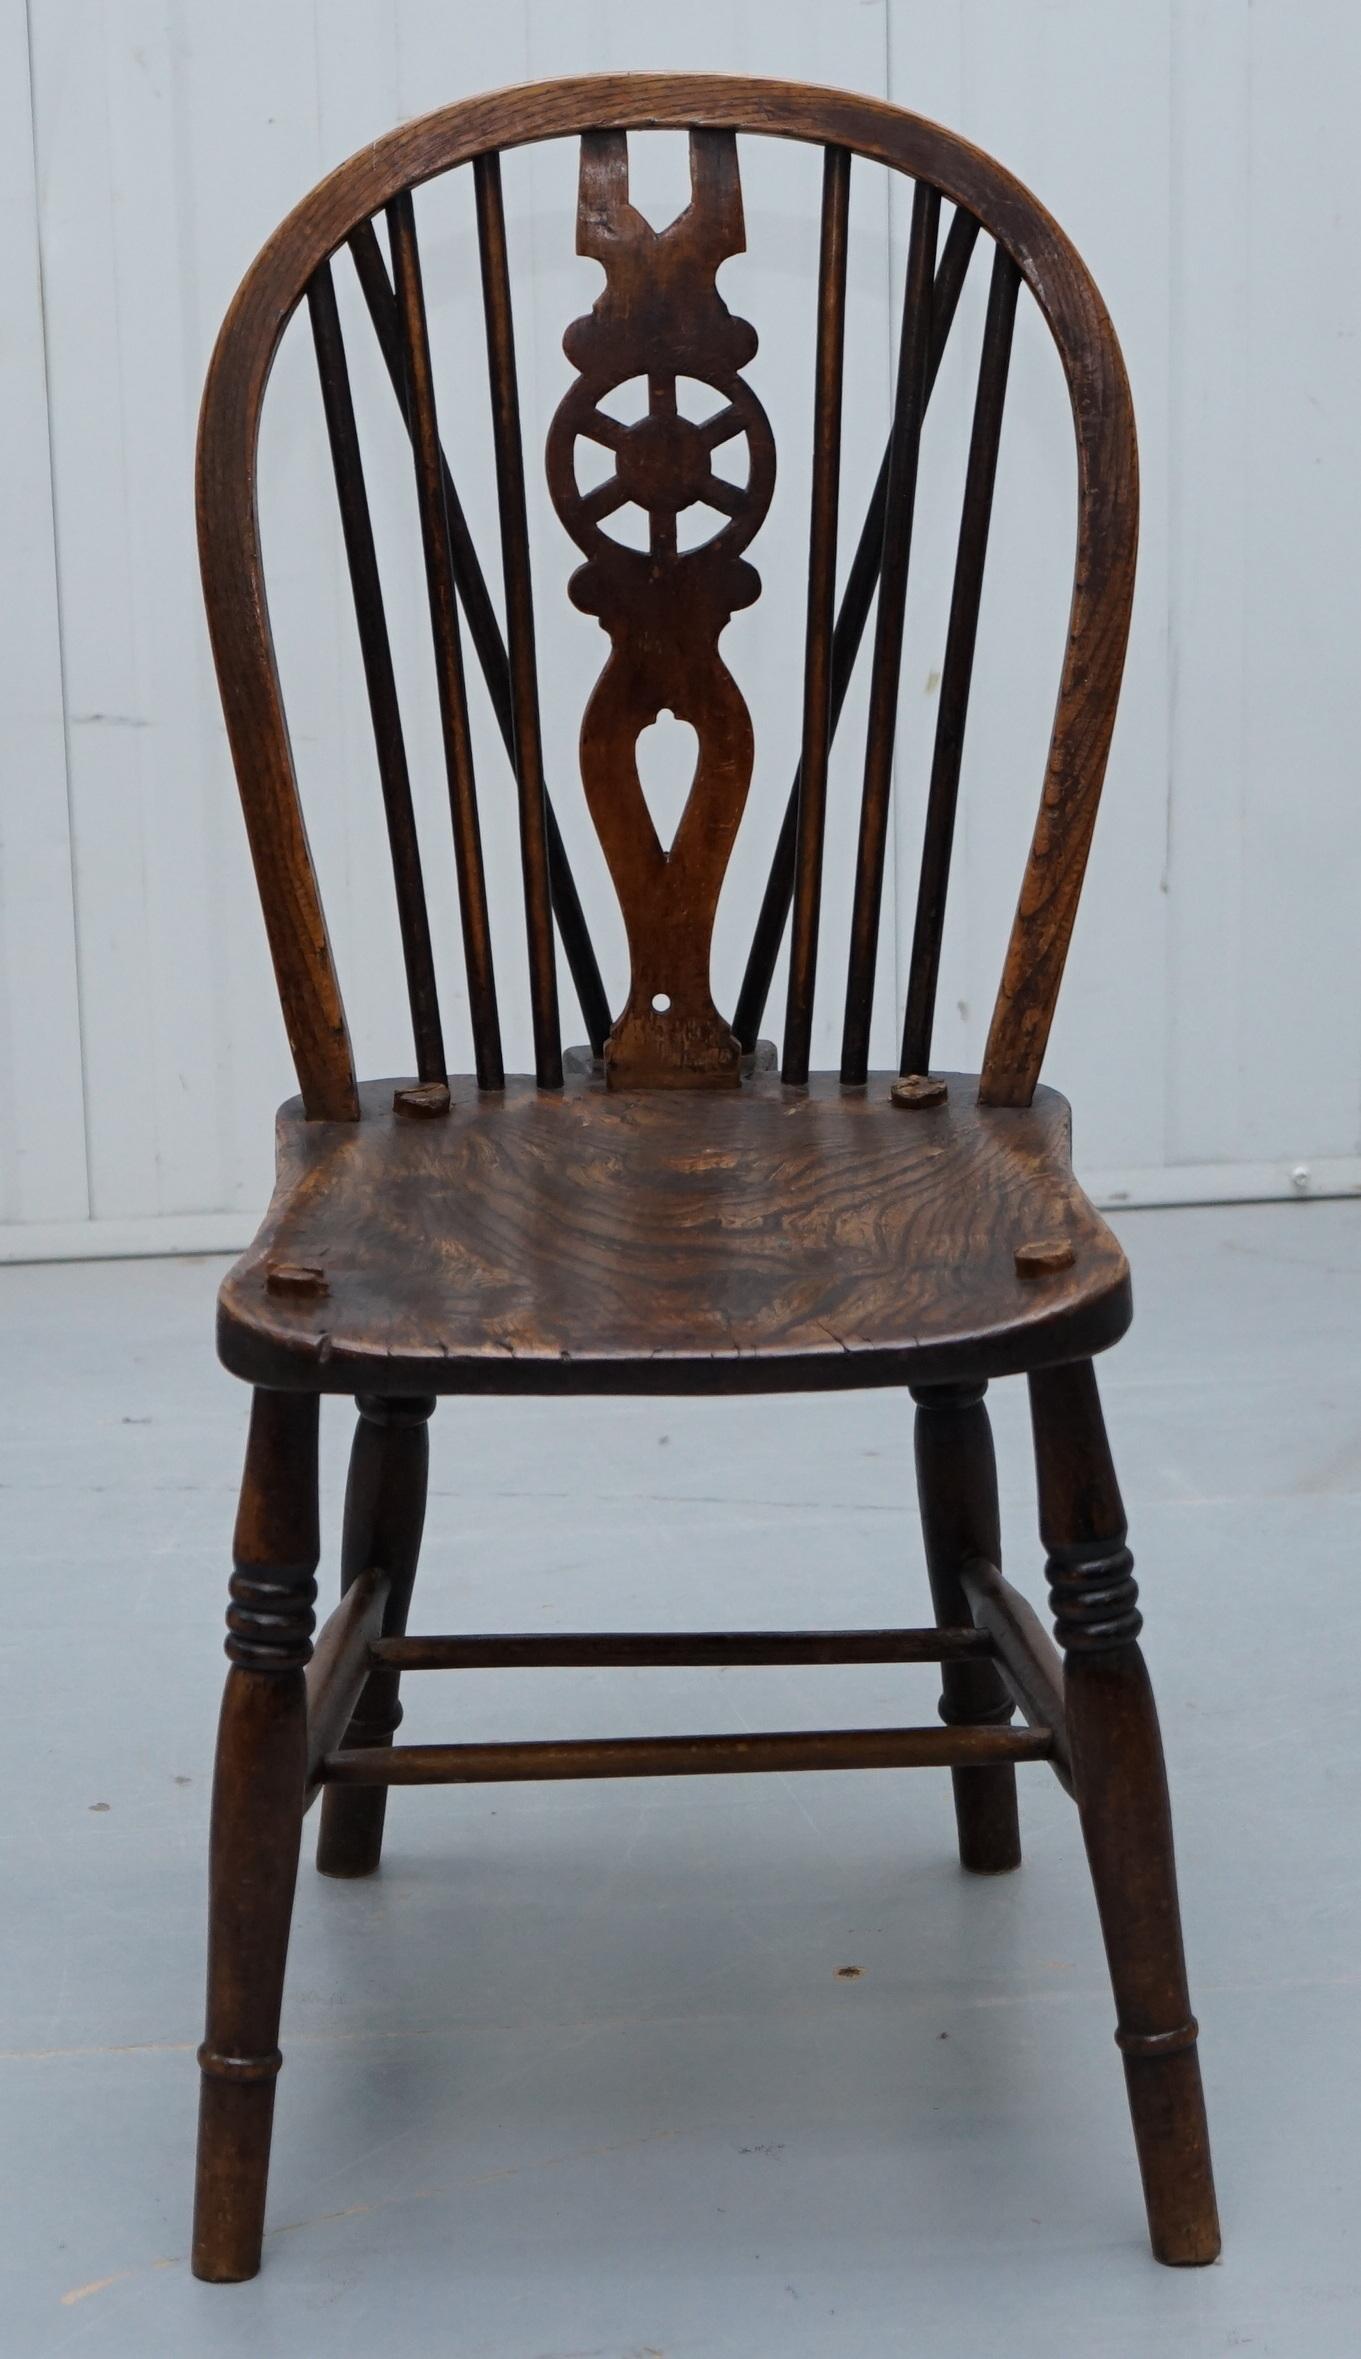 Early Victorian Rare Set of 6 Victorian 1840 Hoop Back Windsor Chairs High Wycombe, England